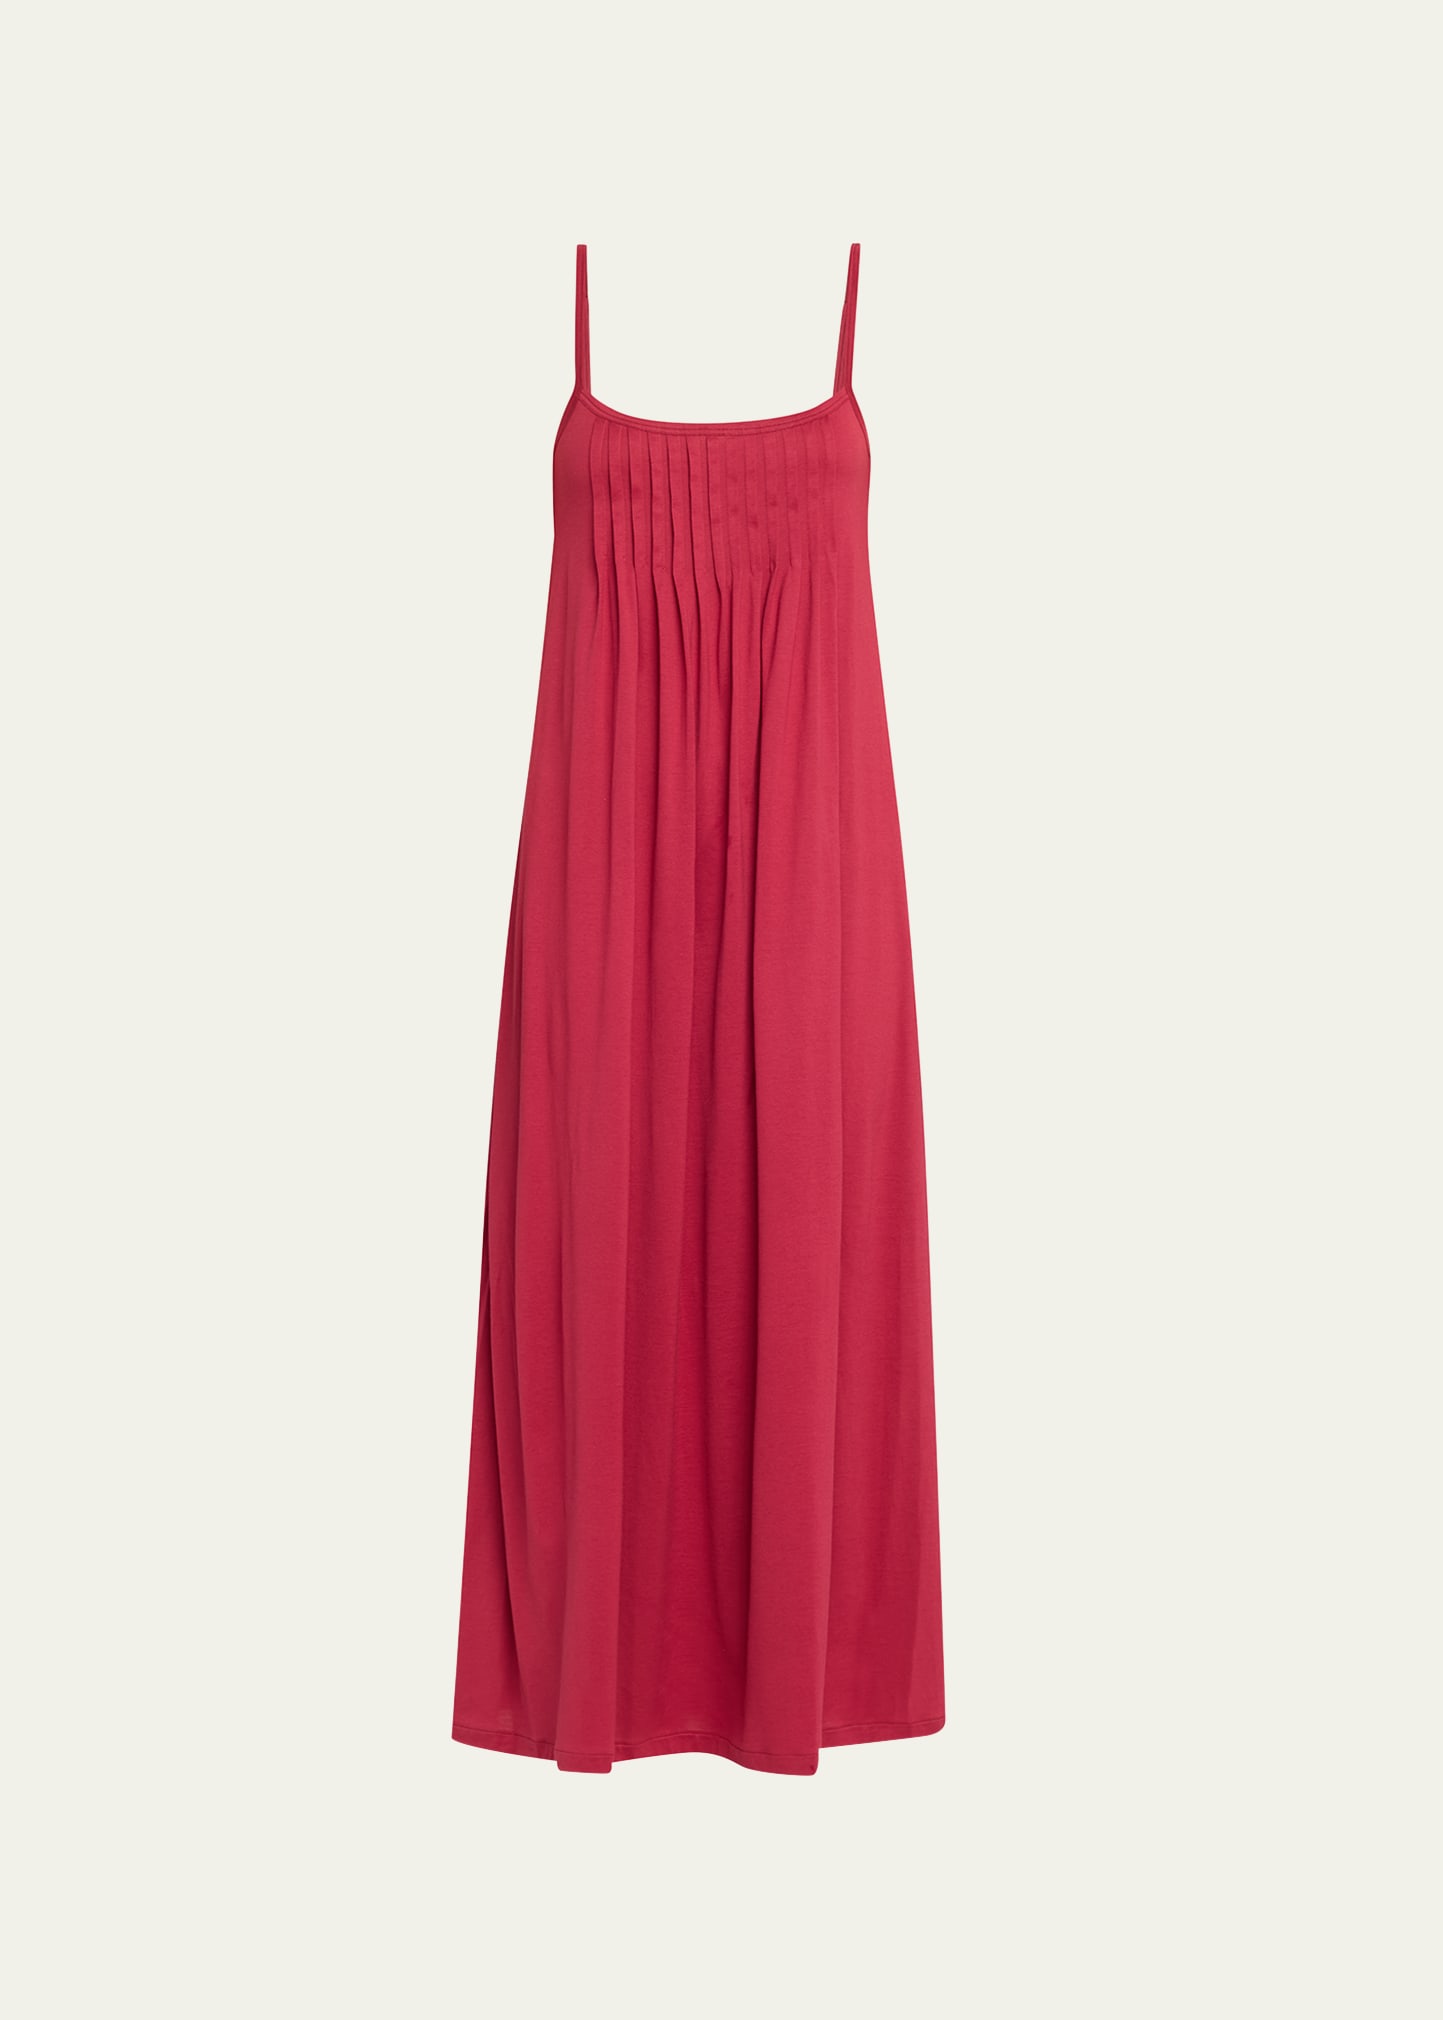 Hanro Juliet Pleated Chemise - Berry Red